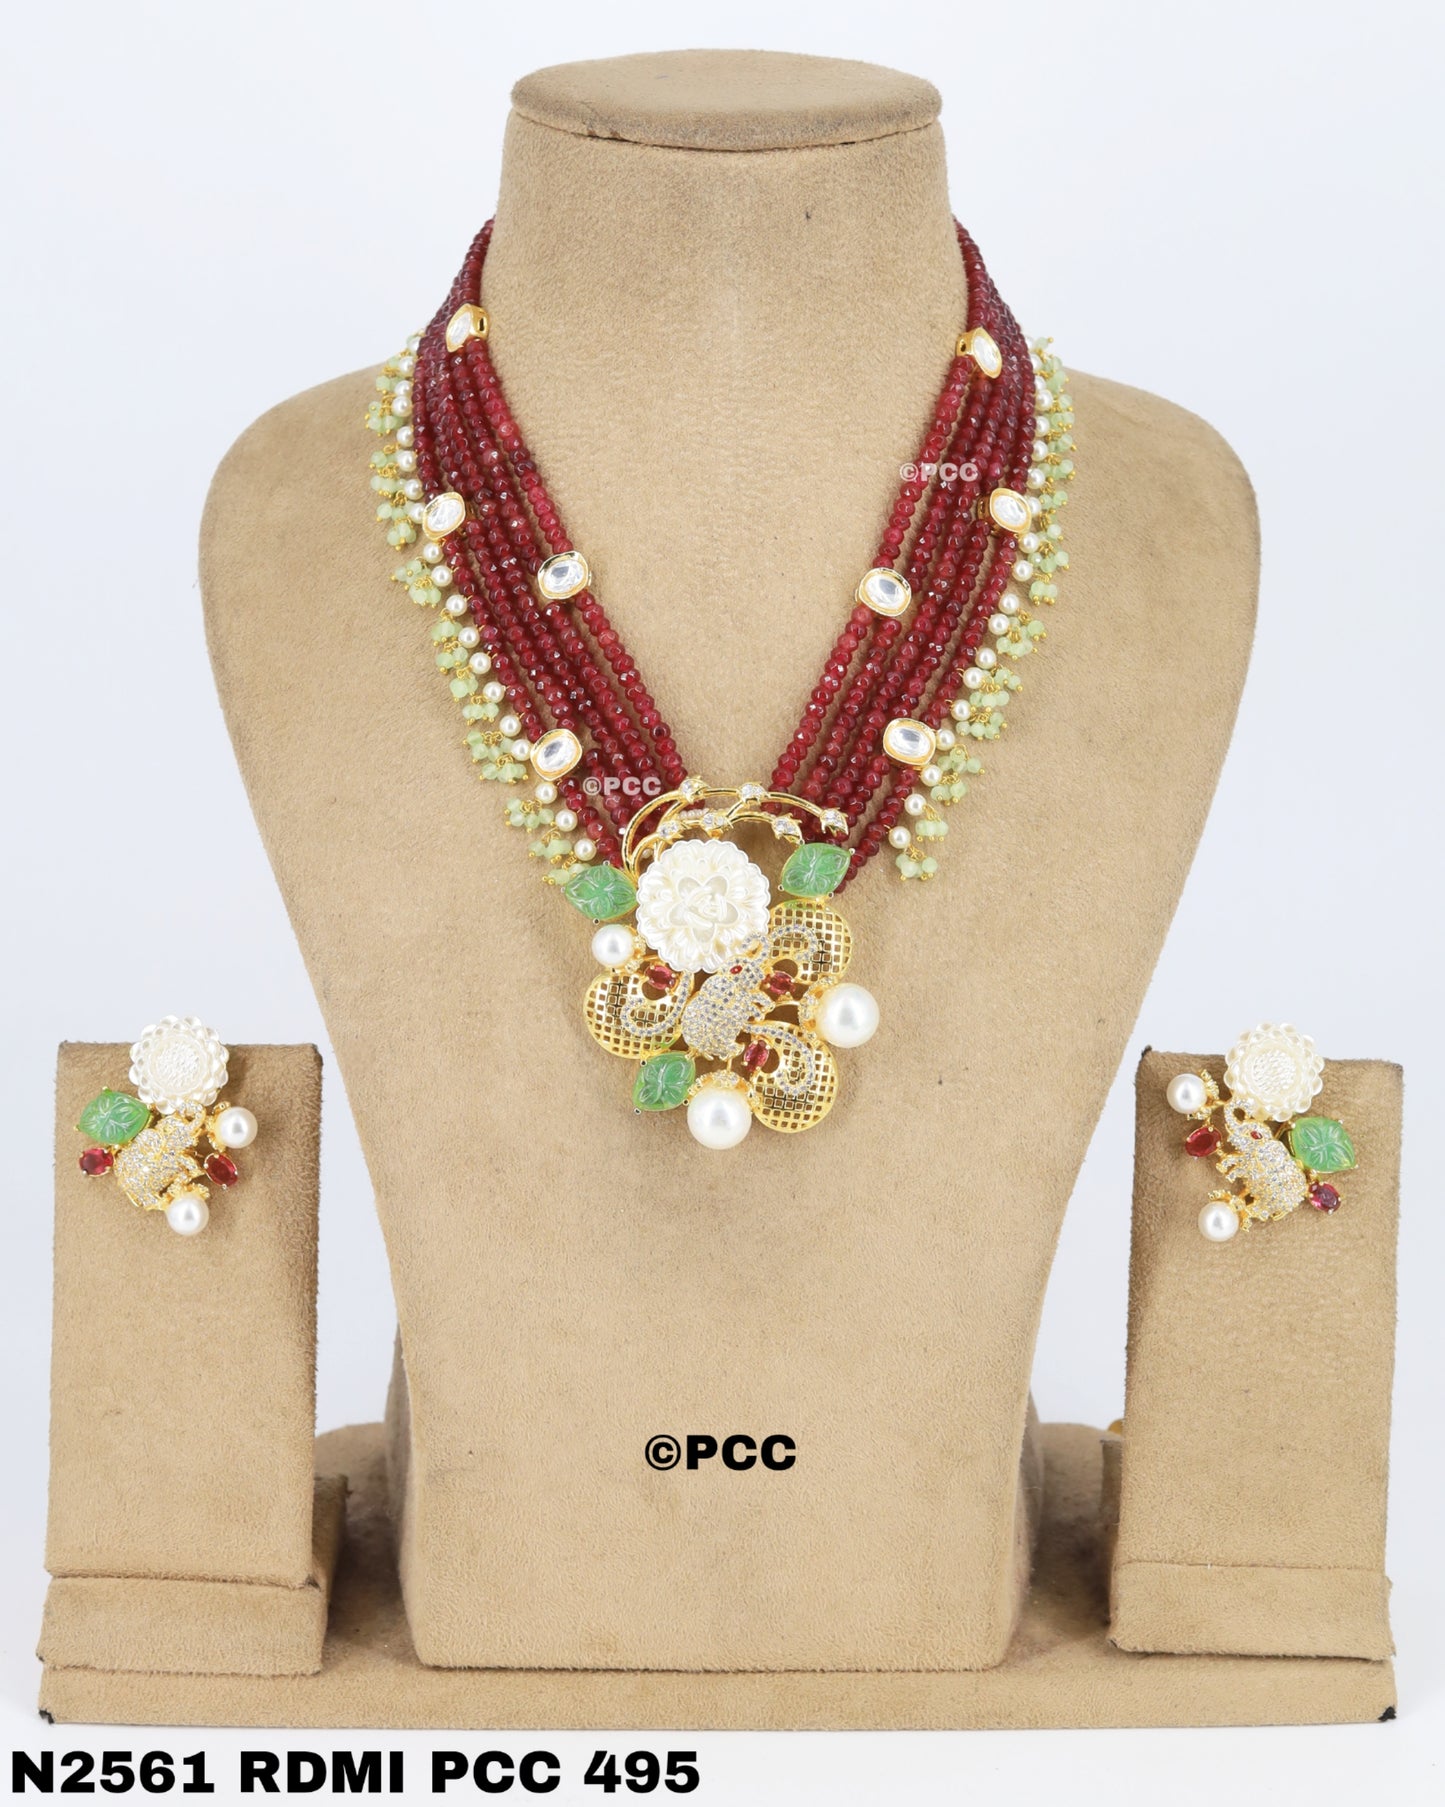 Designer Mother of Pearl Handmade Necklace set with Earrings